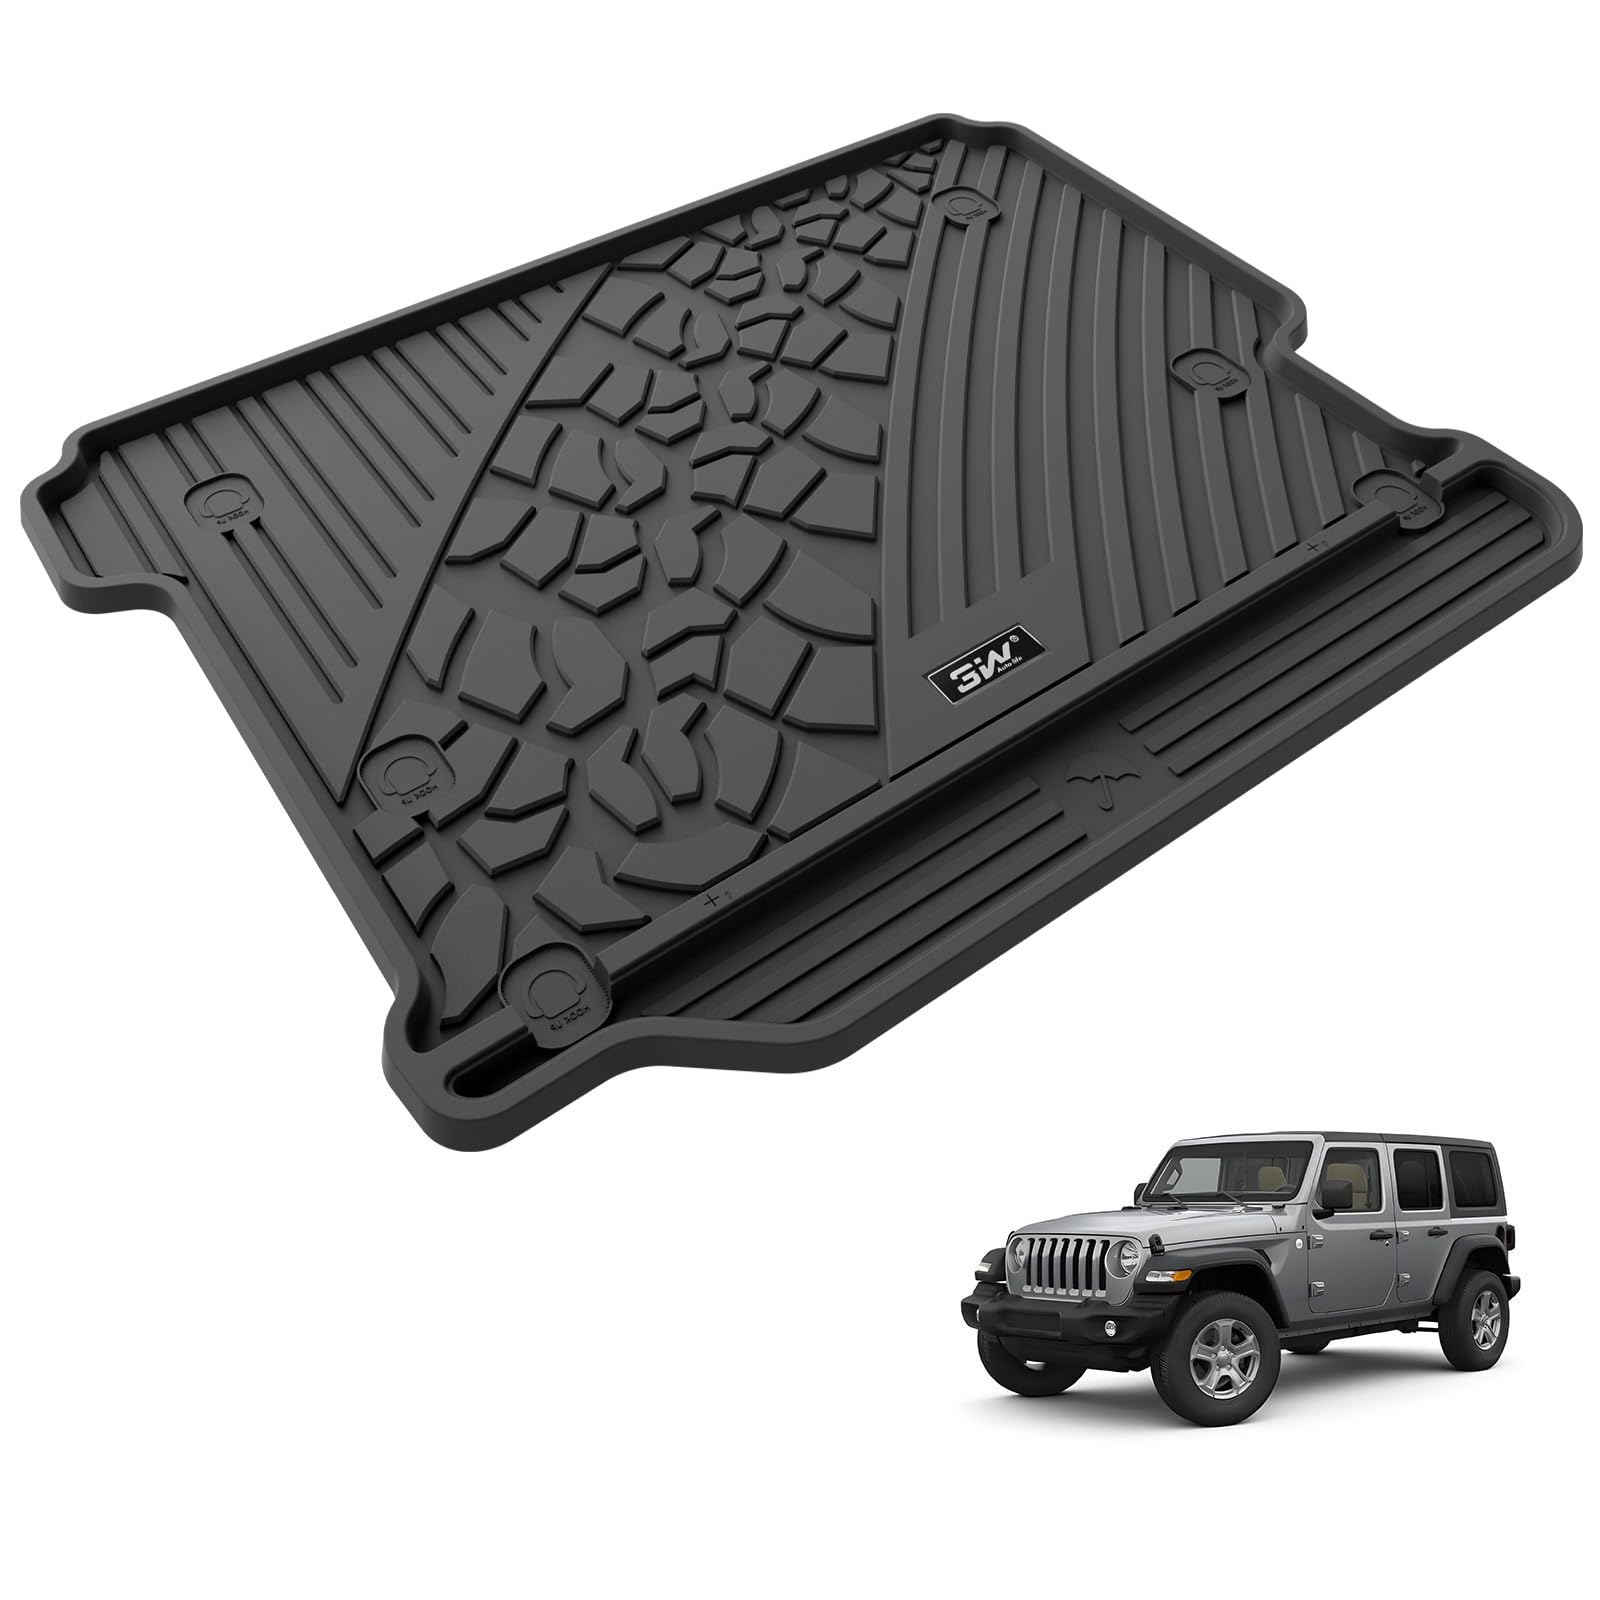 3W Jeep Wrangler JL (Non JK or 4XE) 2018-2023 Custom Floor Mats / Trunk Mat TPE Material & All-Weather Protection Vehicles & Parts 3w 2018-2023 Wrangler JL 2018-2023 without Subwoofer Trunk Mat